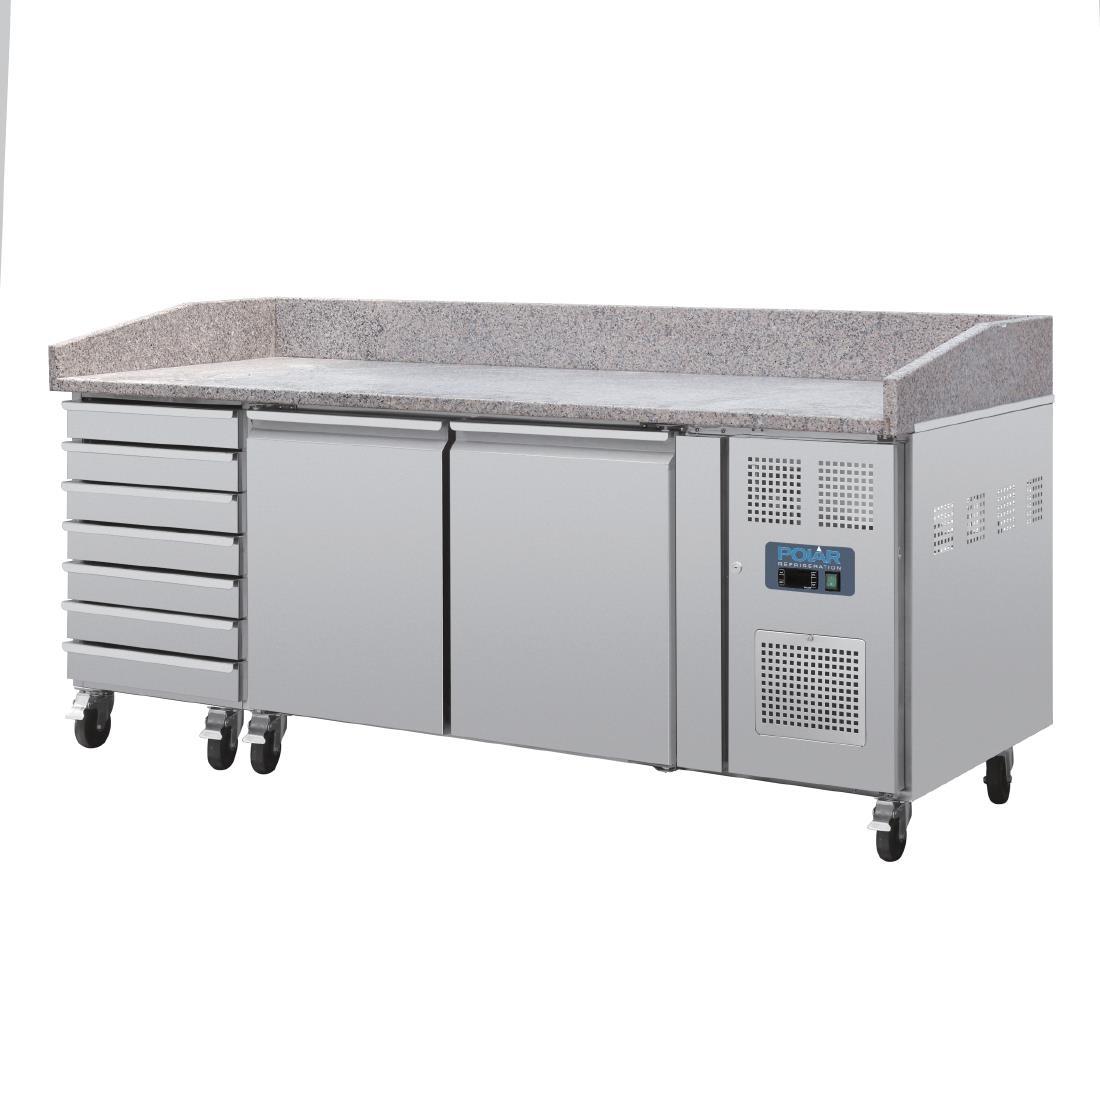 Polar U-Series Double Door Pizza Counter with Marble Top and Dough Drawers 290Ltr - CT423  - 3